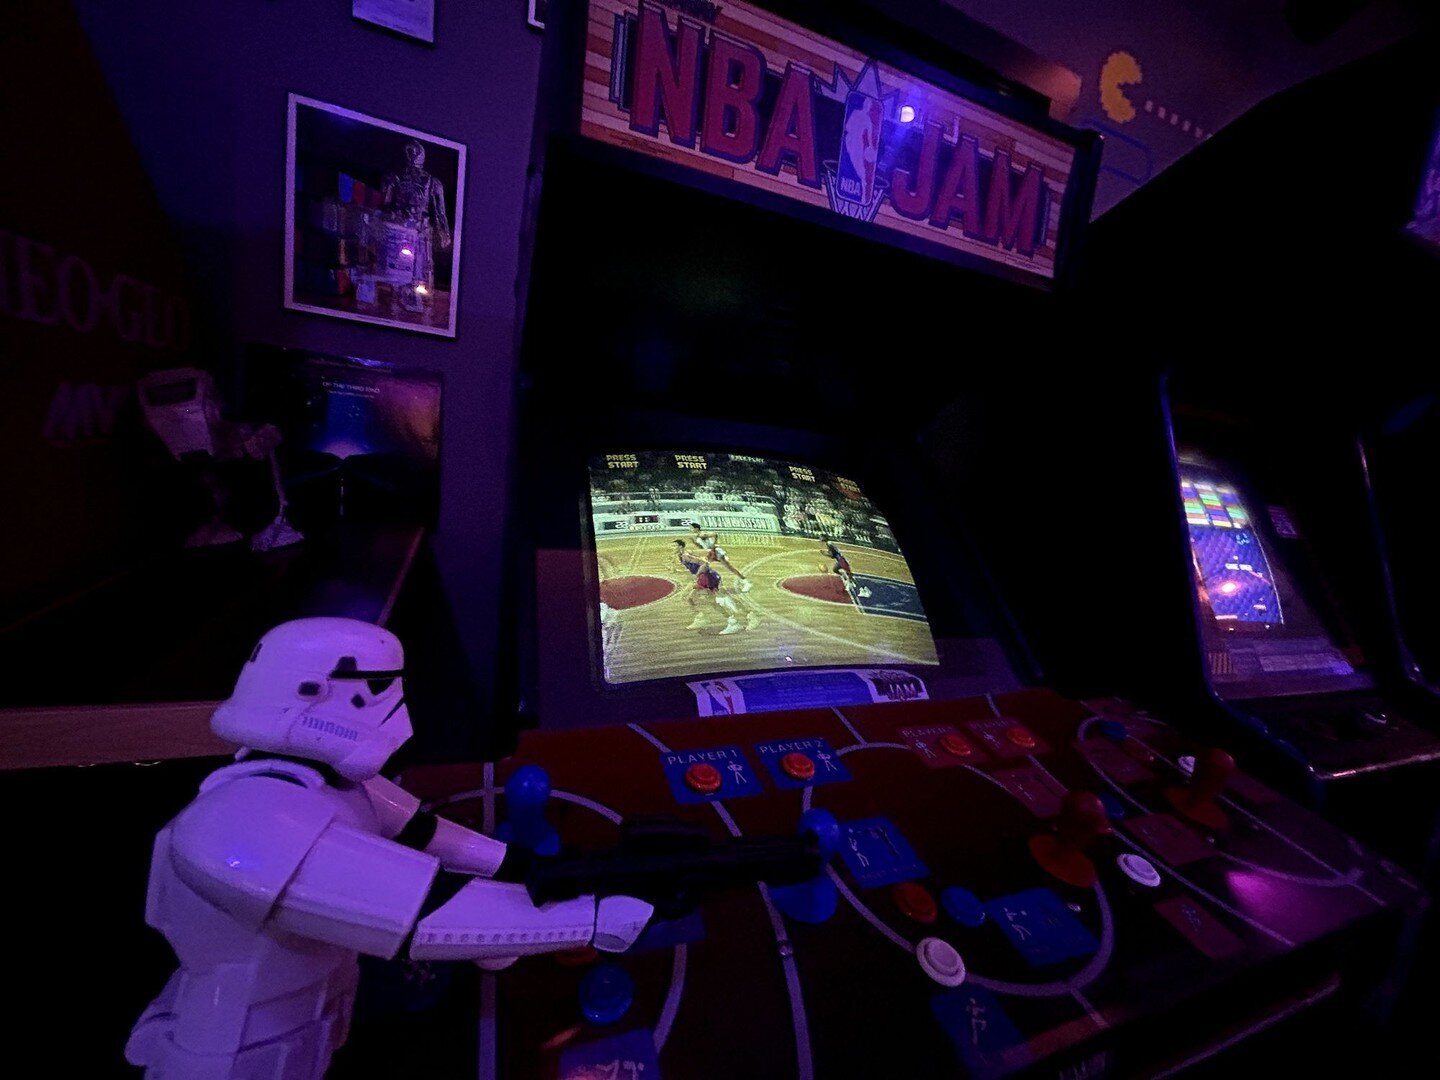 Play against friends, the computer or some of the worst shooters in the galaxy! We're open for food, drinks and NBA jam is heattttting up!